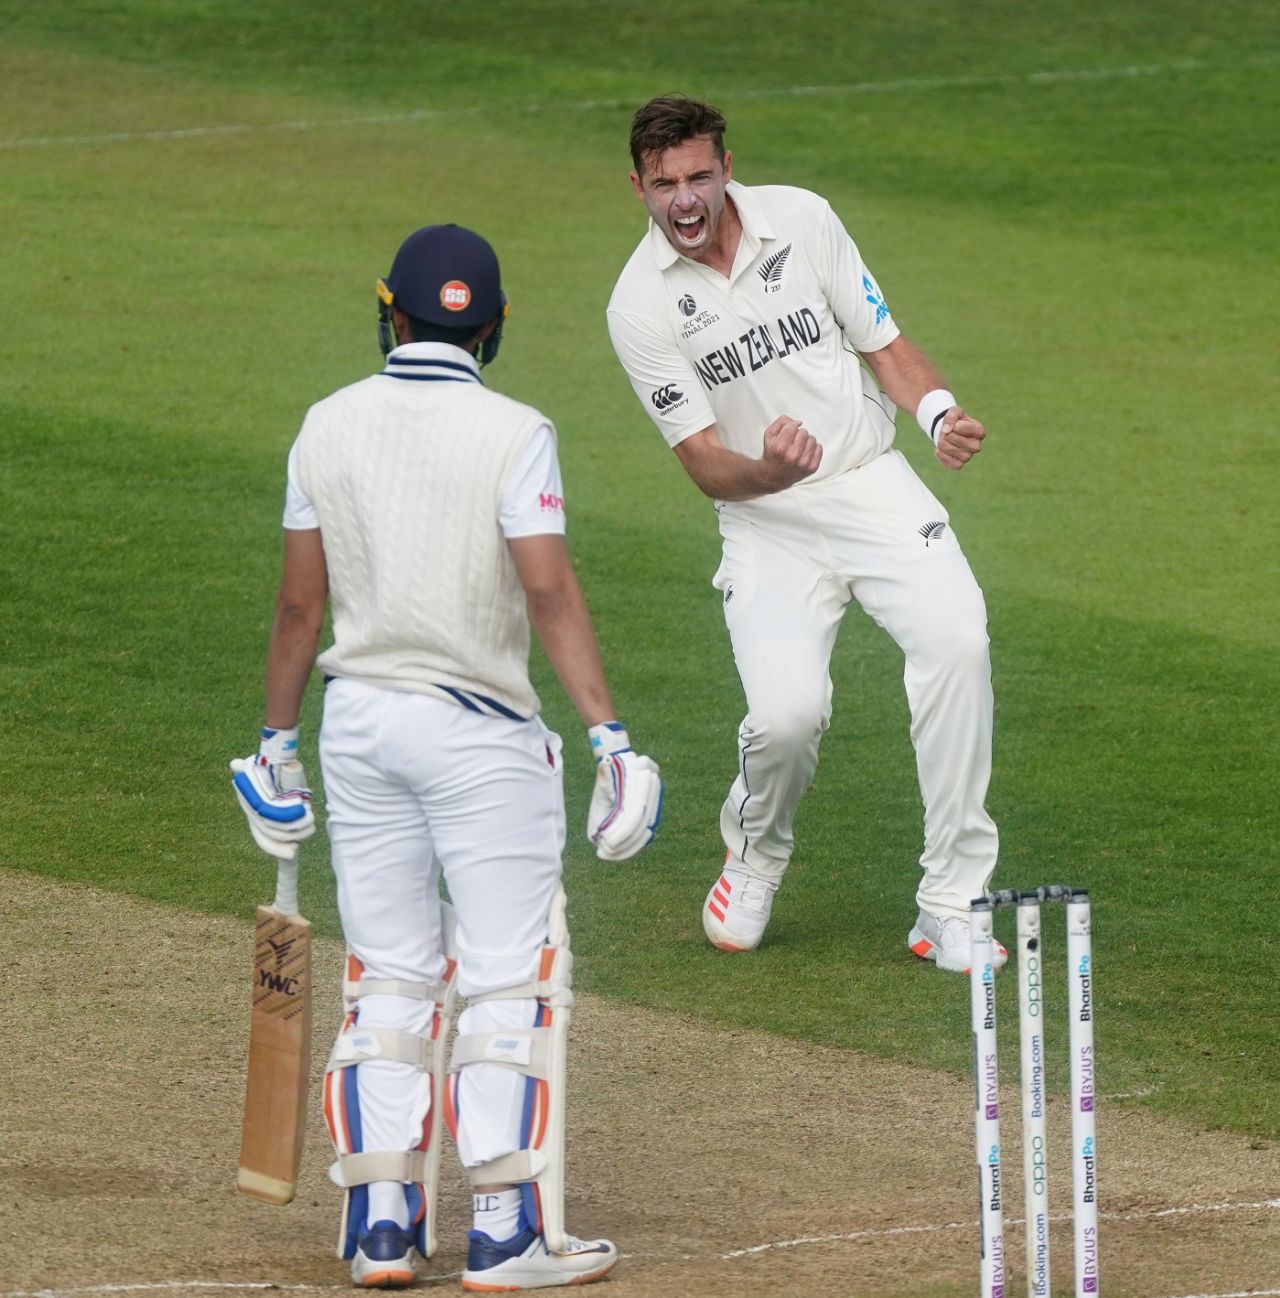 Tim Southee is jubilant after sending back Shubman Gill, India vs New Zealand, WTC final, Southampton, 5th day, June 22, 2021